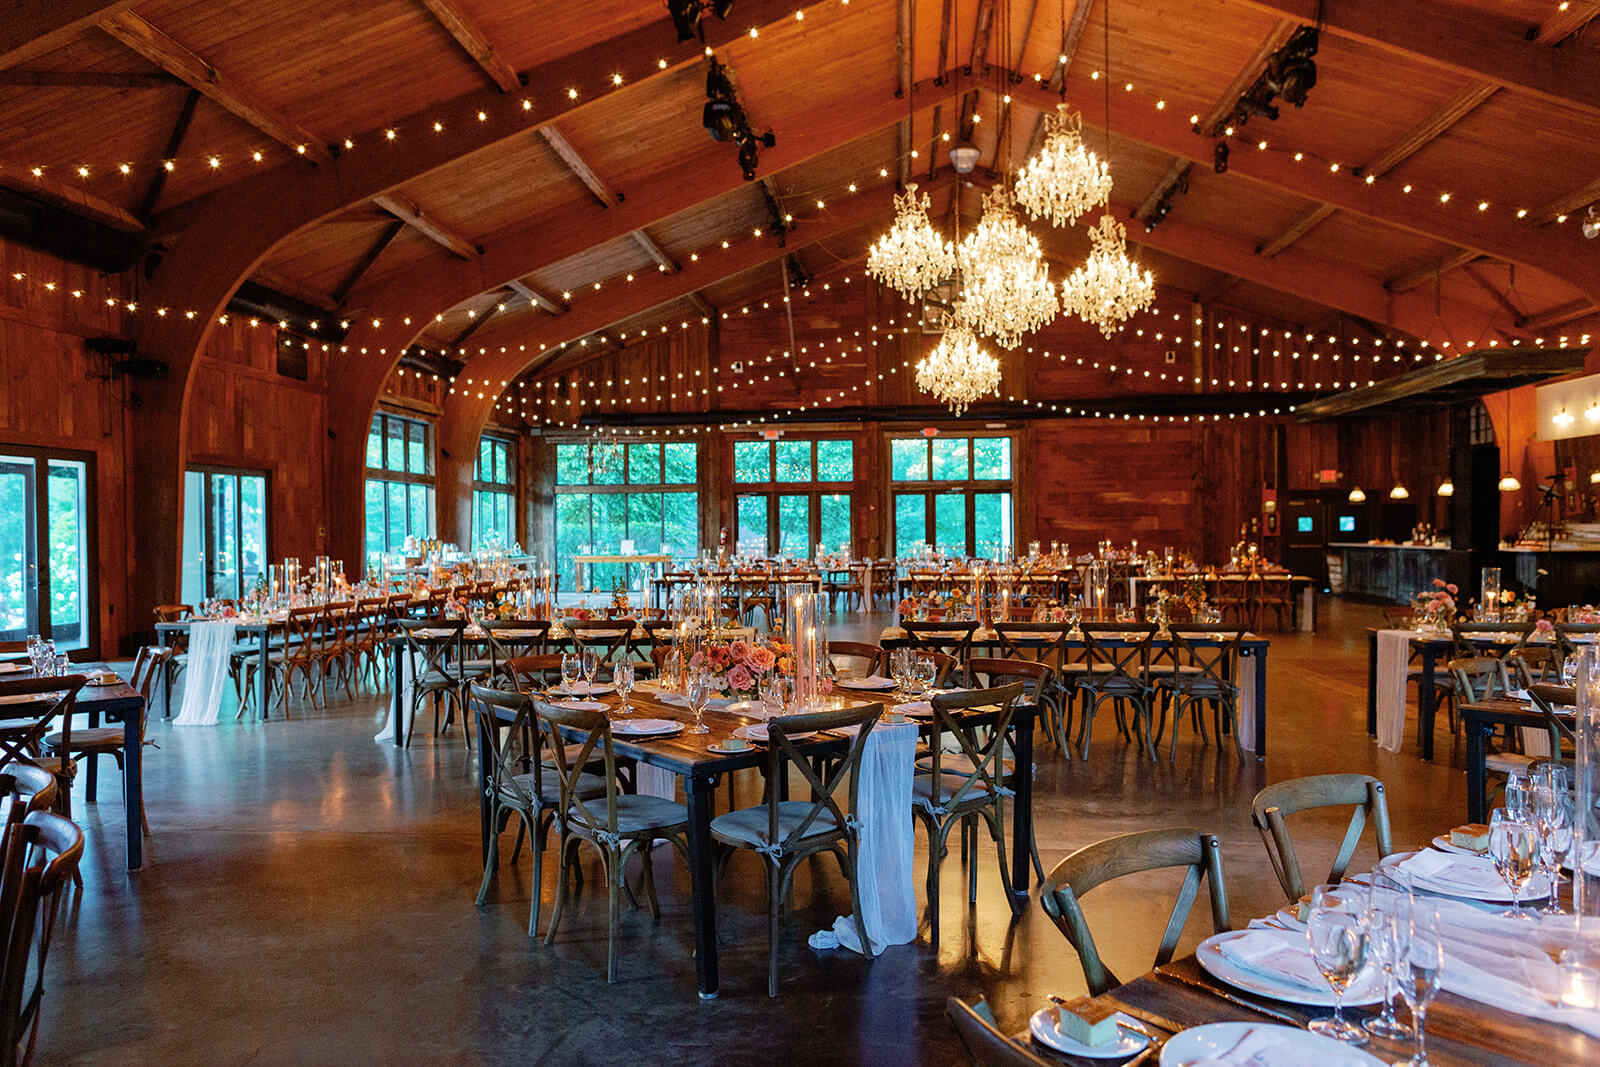 The reception area was held in a rustic barn-like venue where fairy lights were hung among the chandeliers